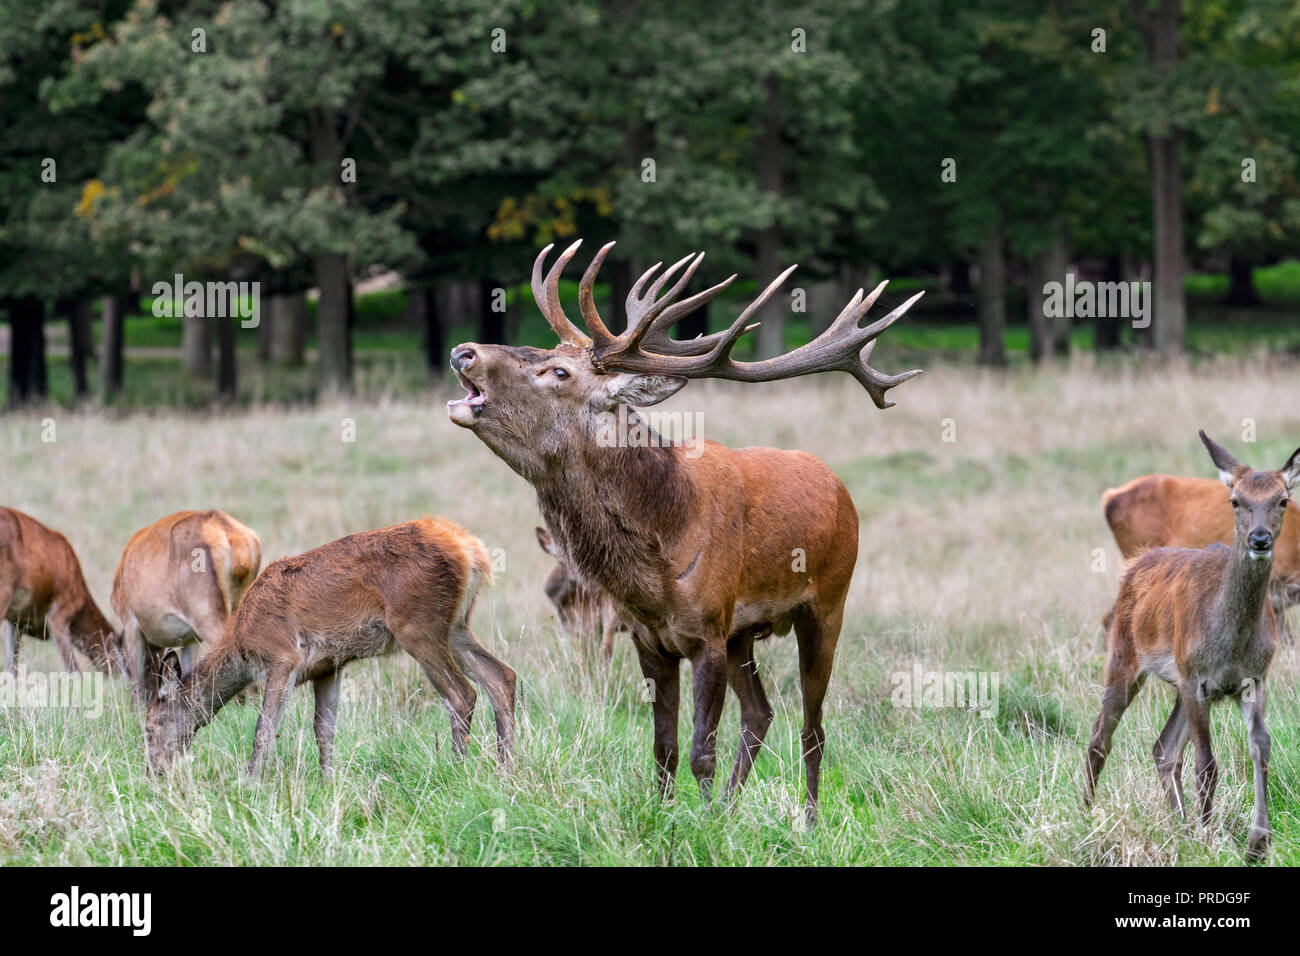 Red deer (Cervus elaphus) stag with huge antlers bellowing among hinds in grassland at forest's edge during the rut in autumn / fall Stock Photo